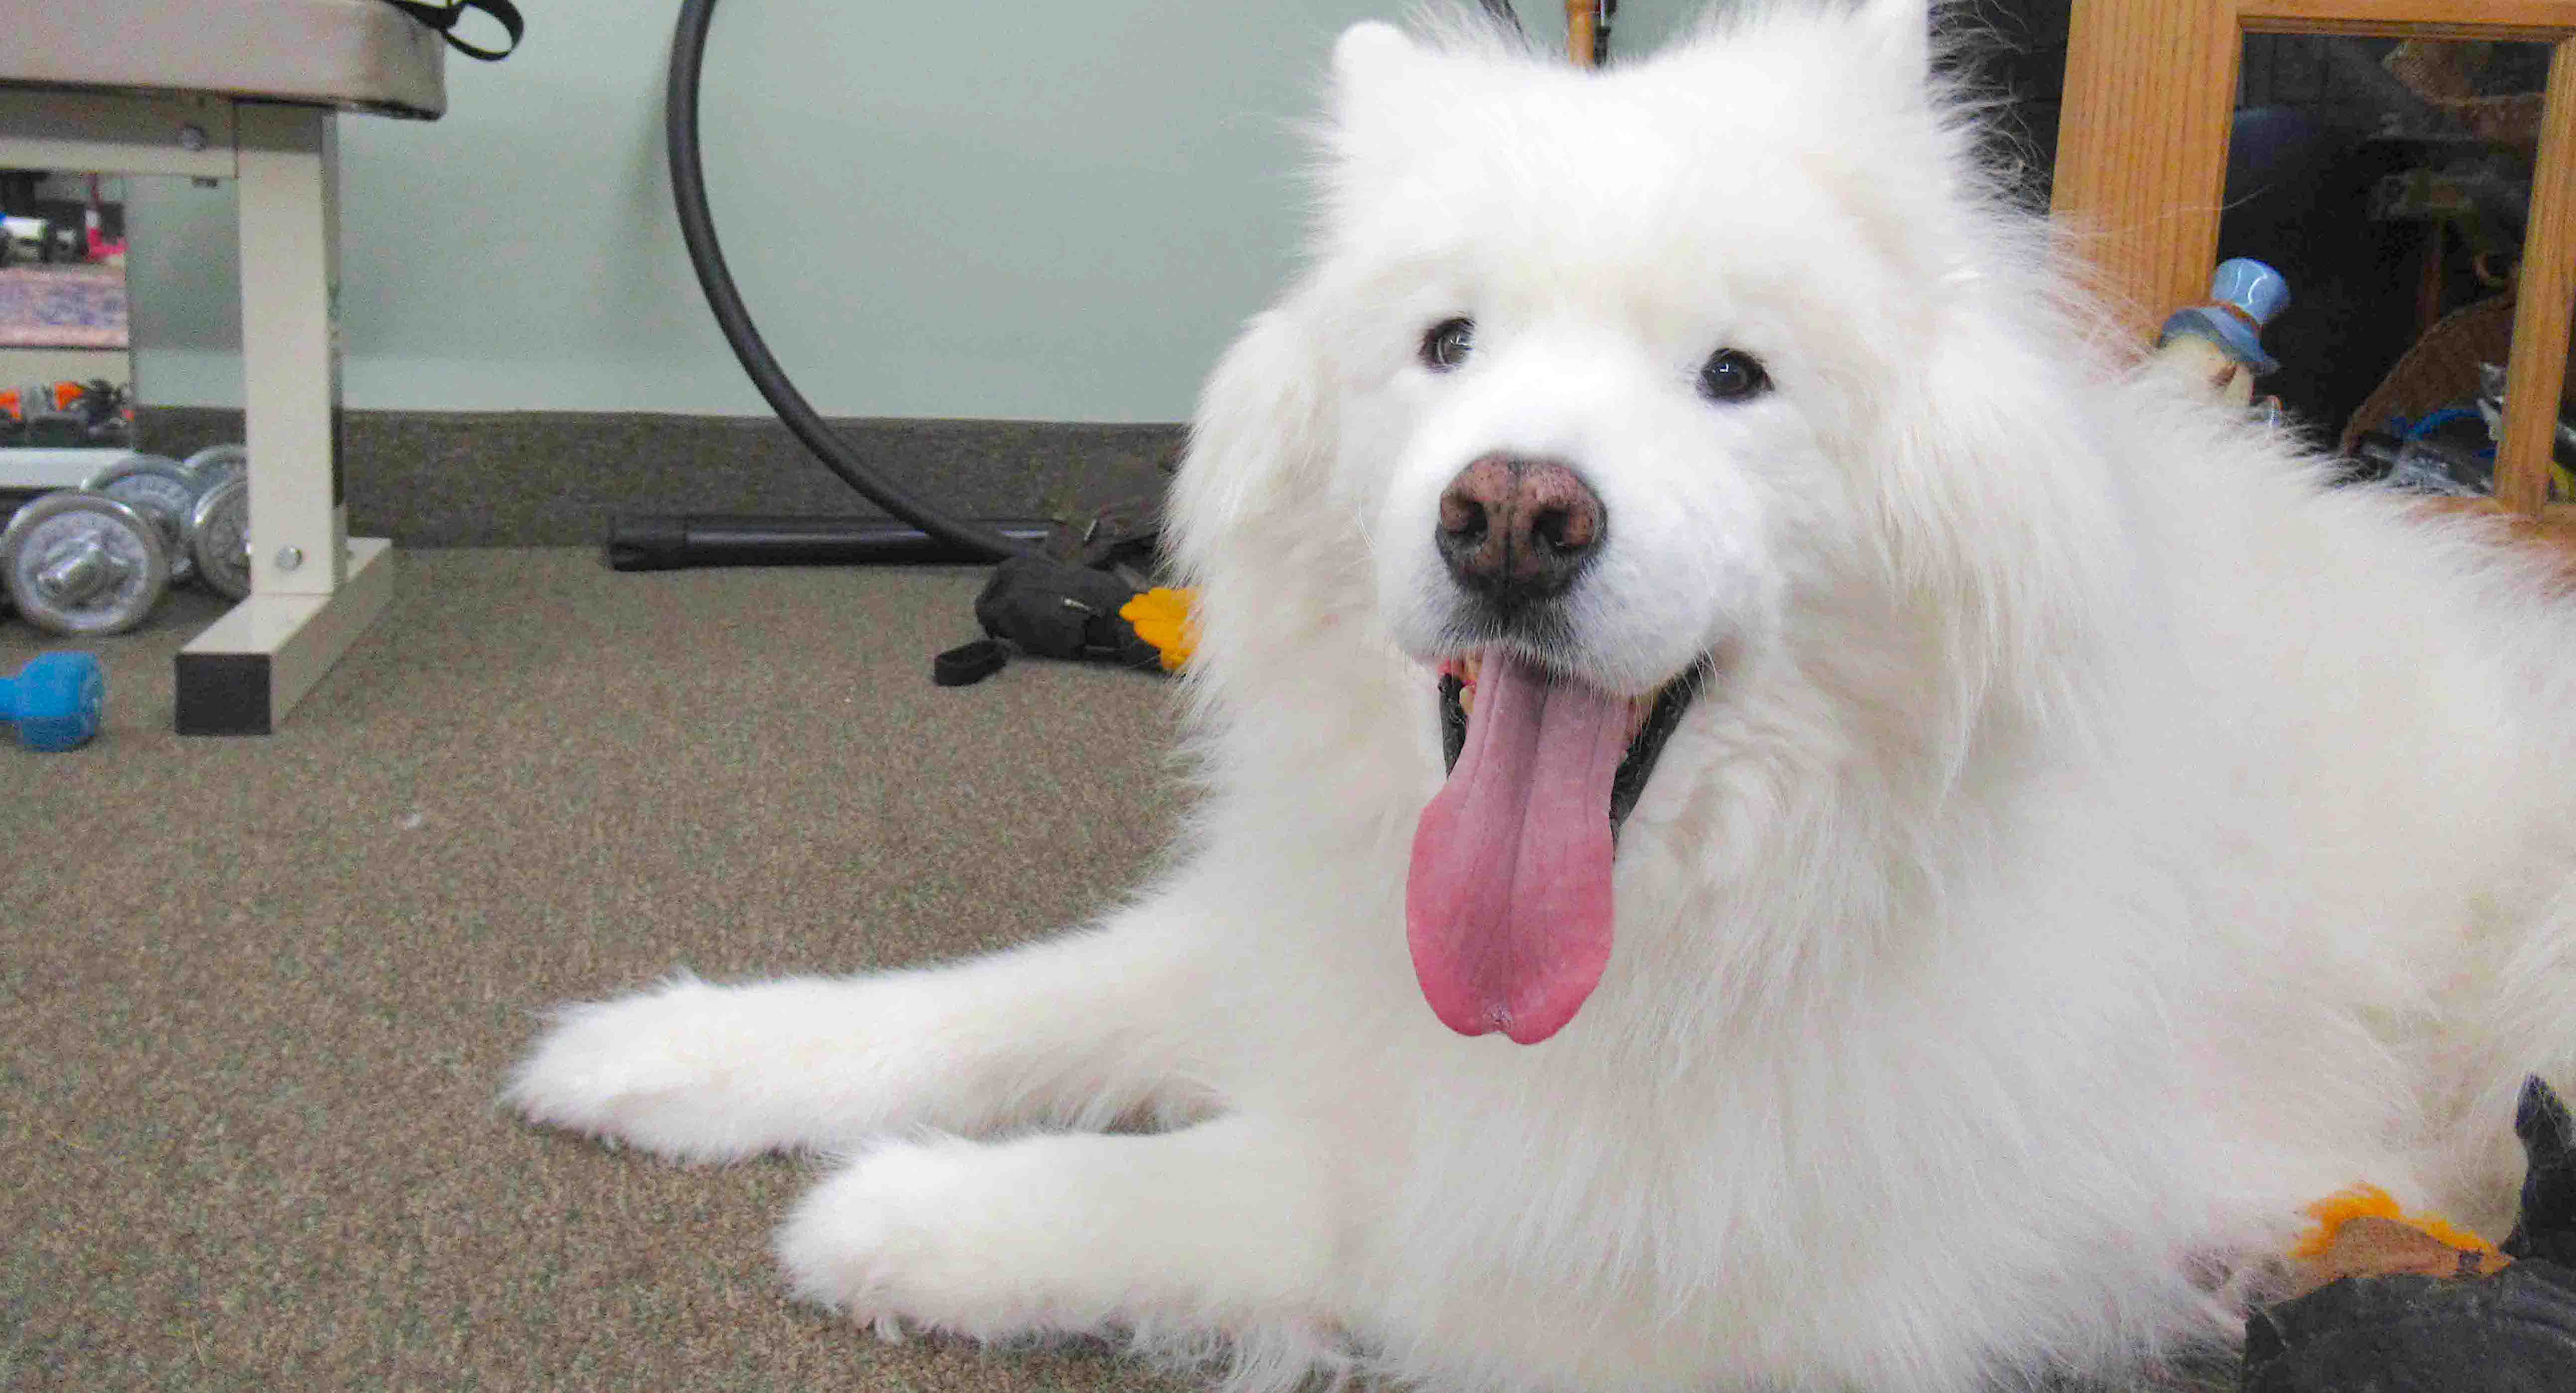 He's 13 Years Old And Has Had 16 Surgeries But Benny Remains ‘THE HAPPIEST PUP EVER’